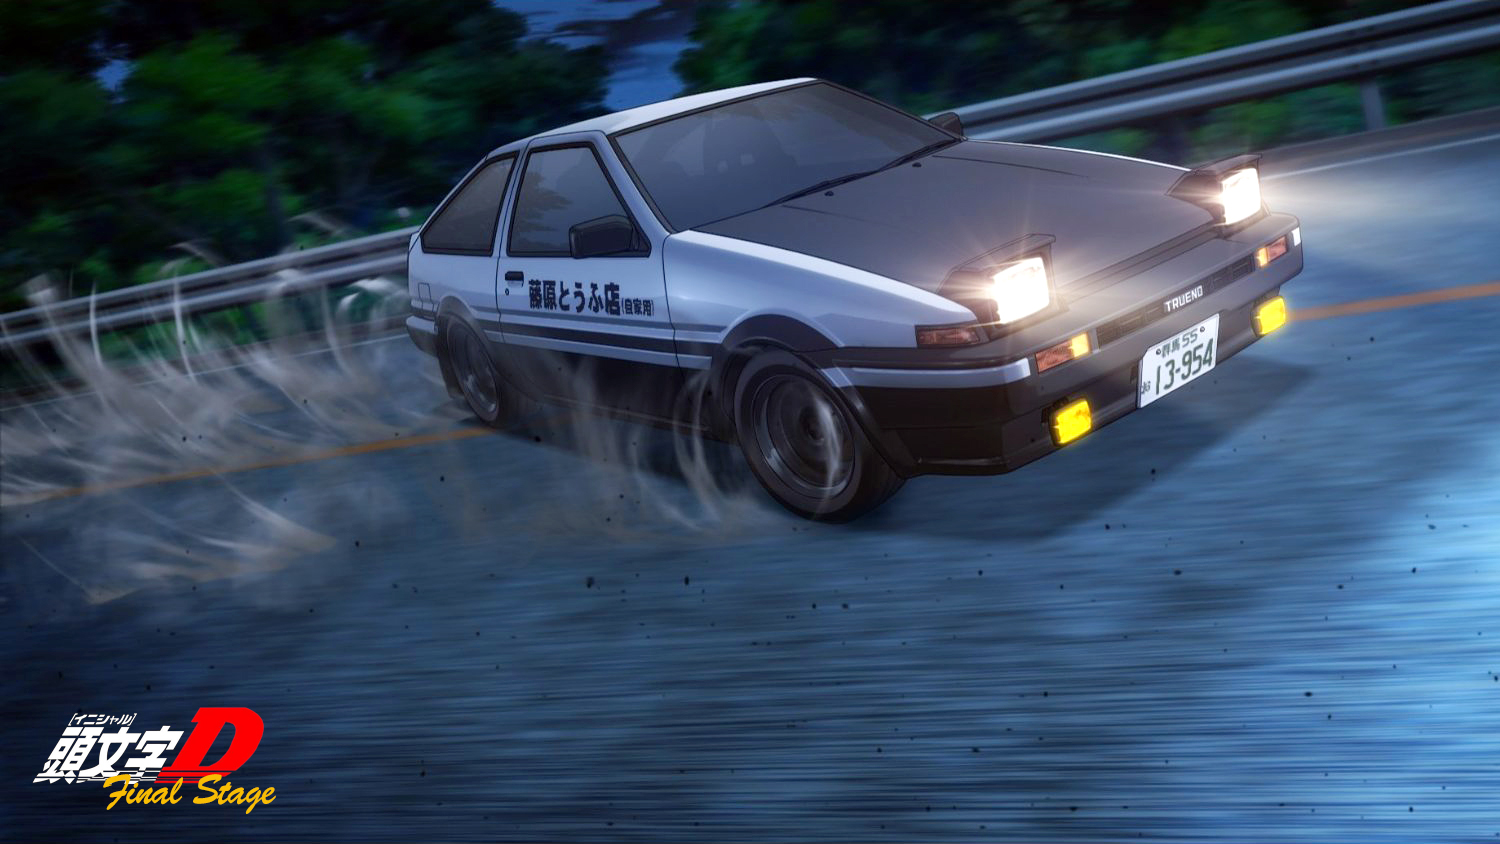 Initial D World - Discussion Board / Forums > Initial D Final Stage to release on 2014 ...1500 x 844